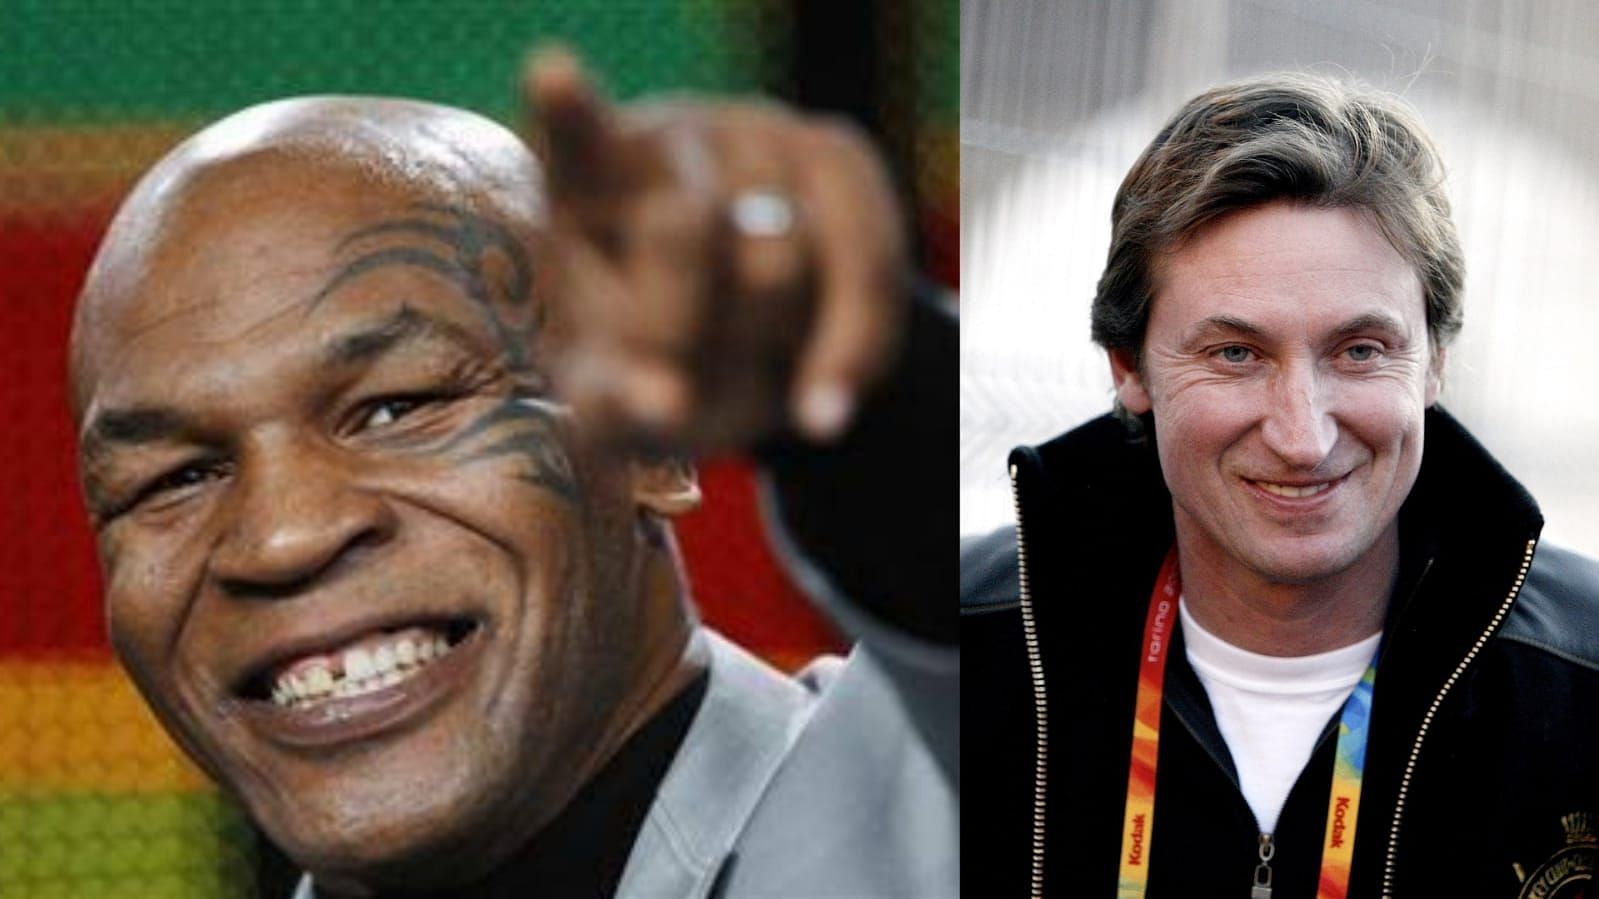 Mike Tyson (left) and Wayne Gretzky (right)